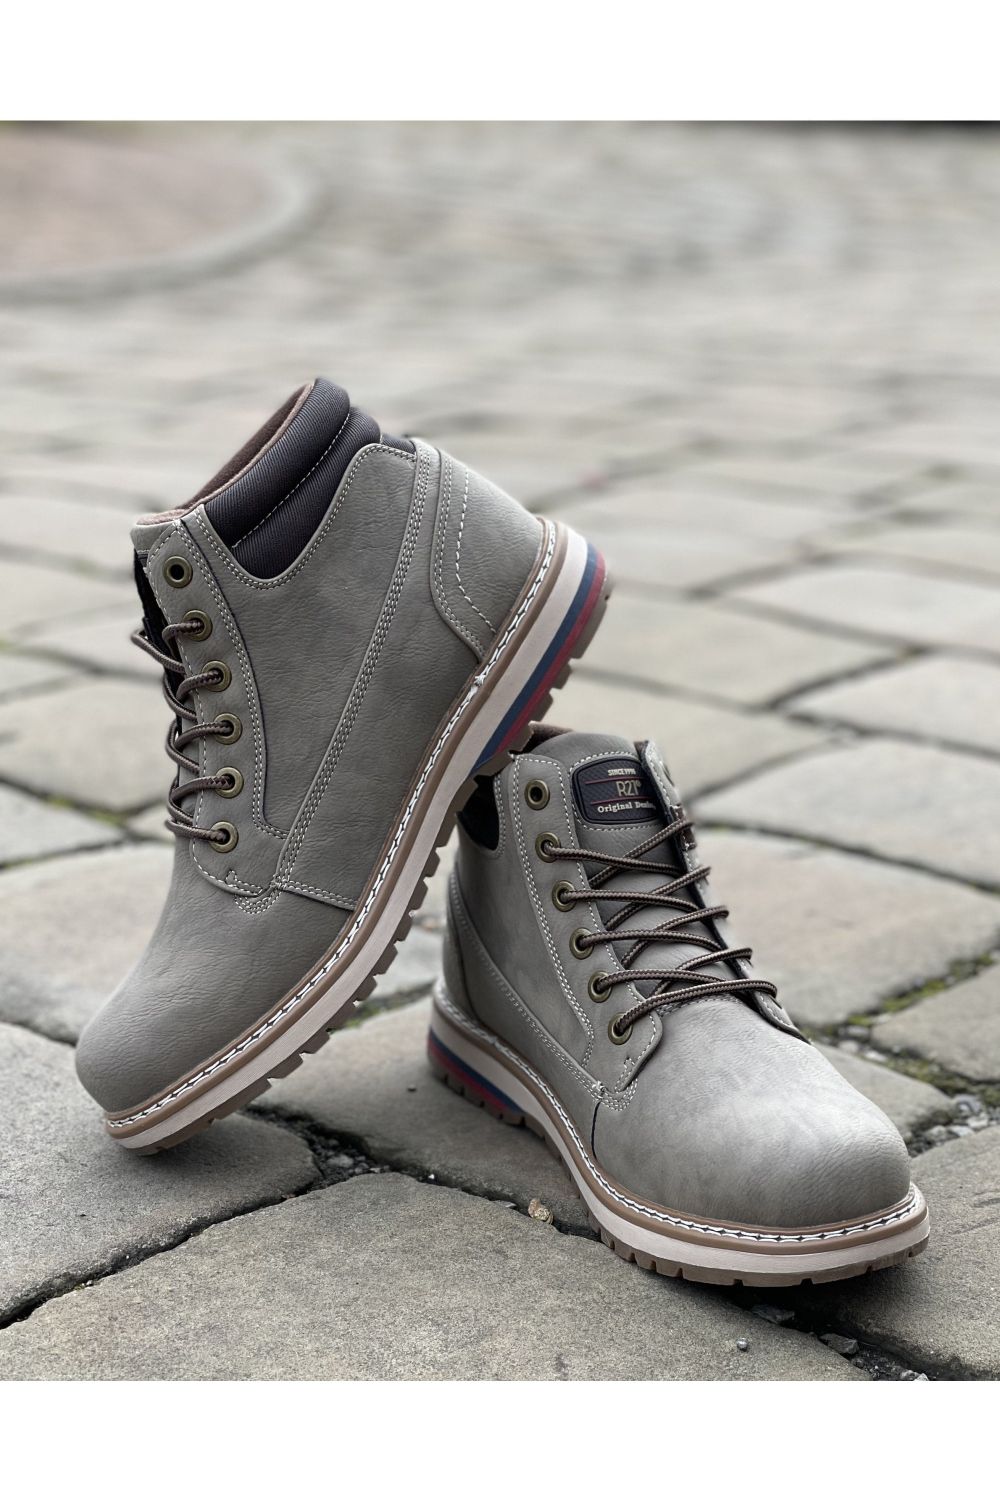 Route 21 Taupe Winter walking boots 